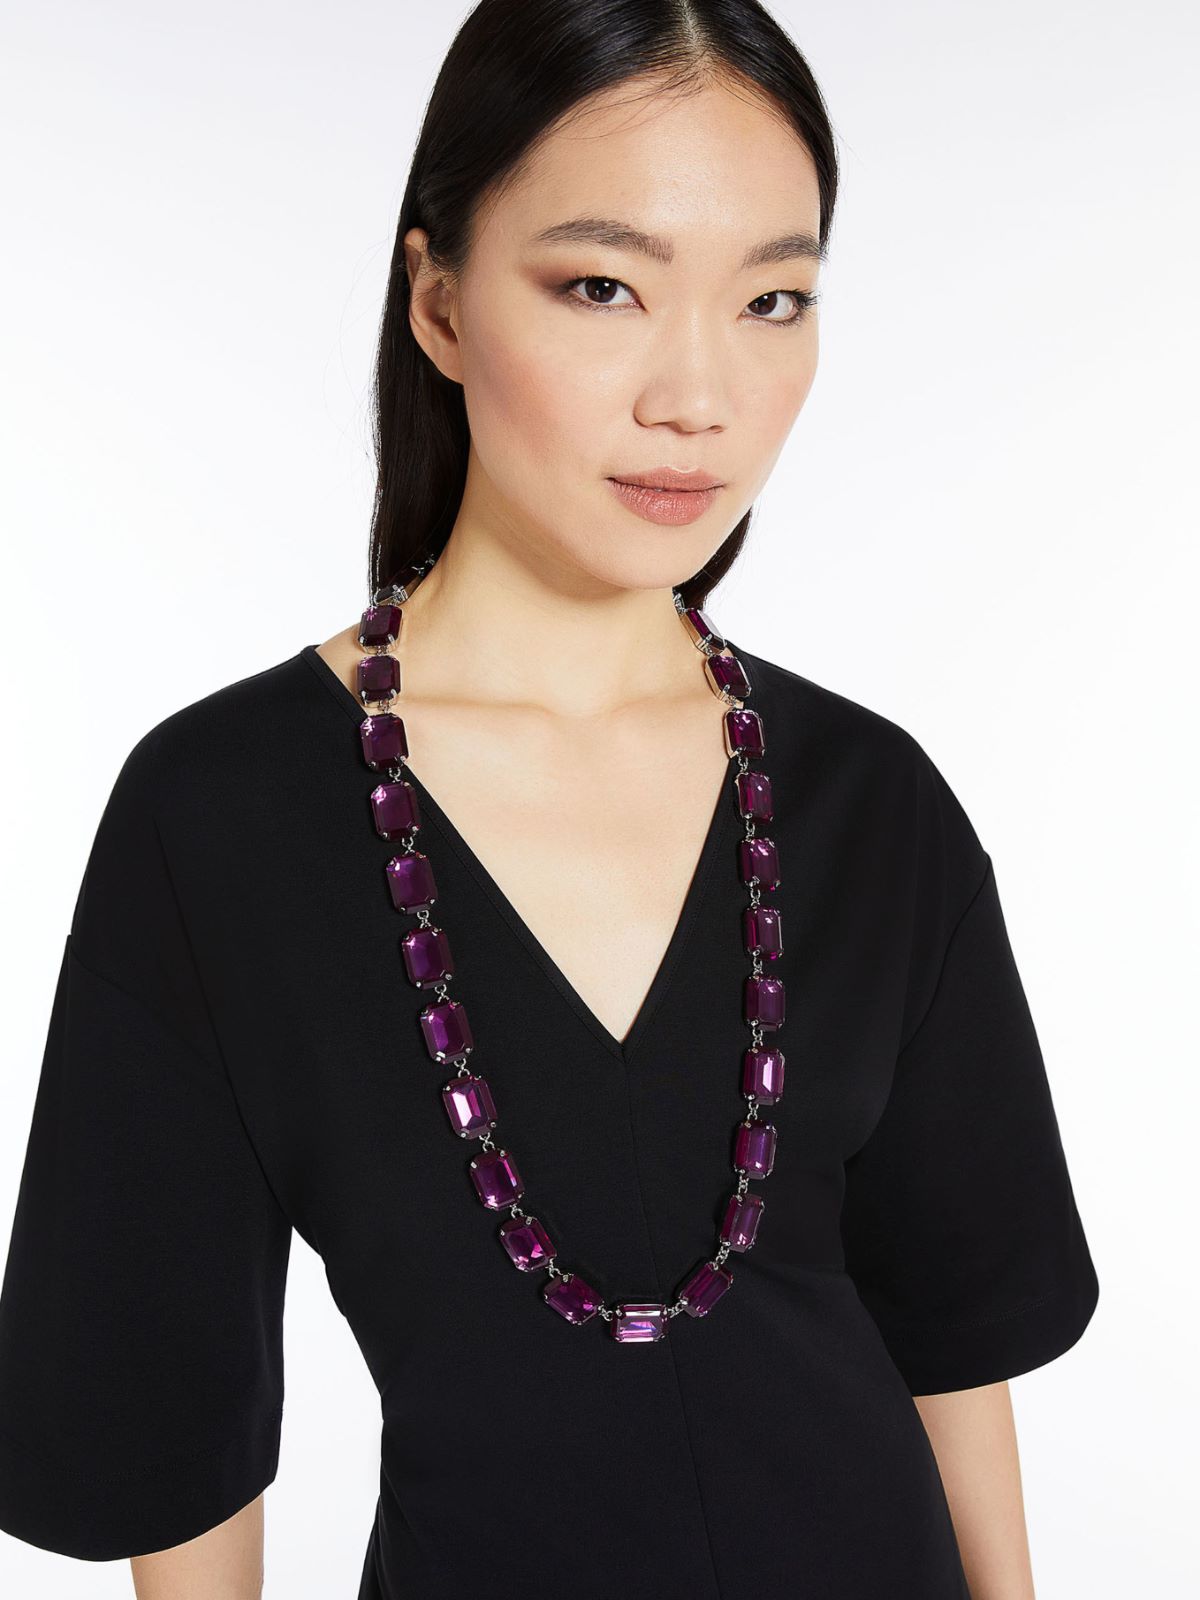 Long necklace with bezels - FUCHSIA - Weekend Max Mara - 3